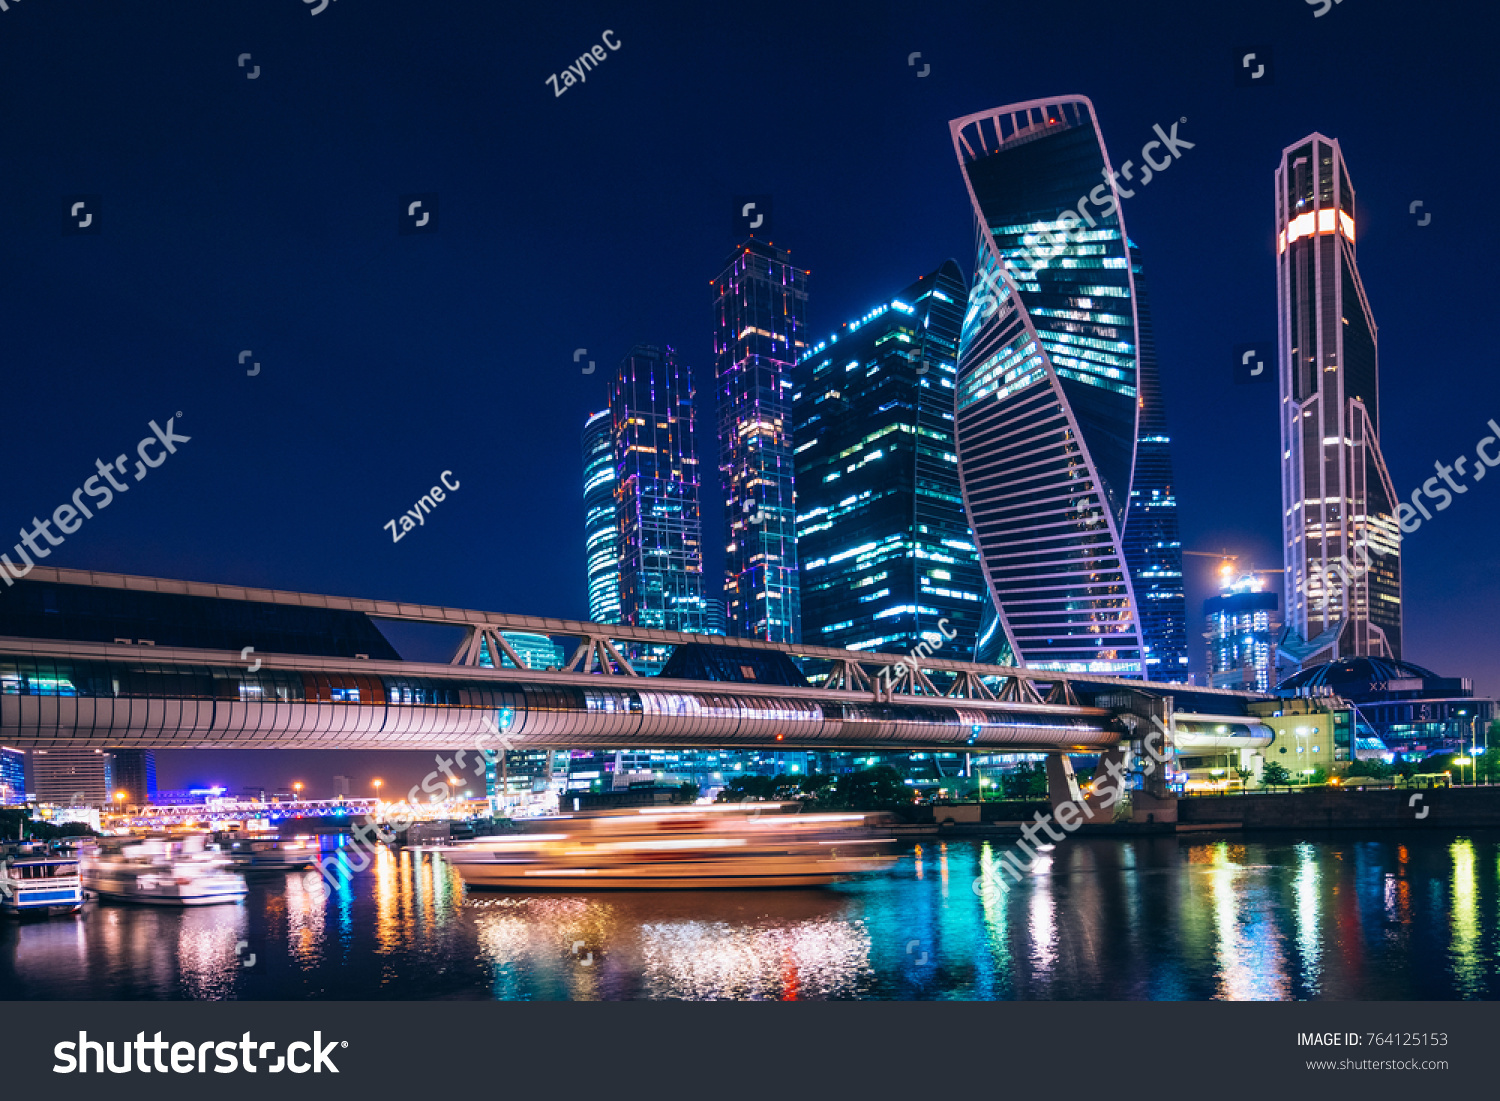 Business center with skyscrapers of Moscow-city at night under the blue sky and with reflections of the illumination on the water. Cityscape #764125153